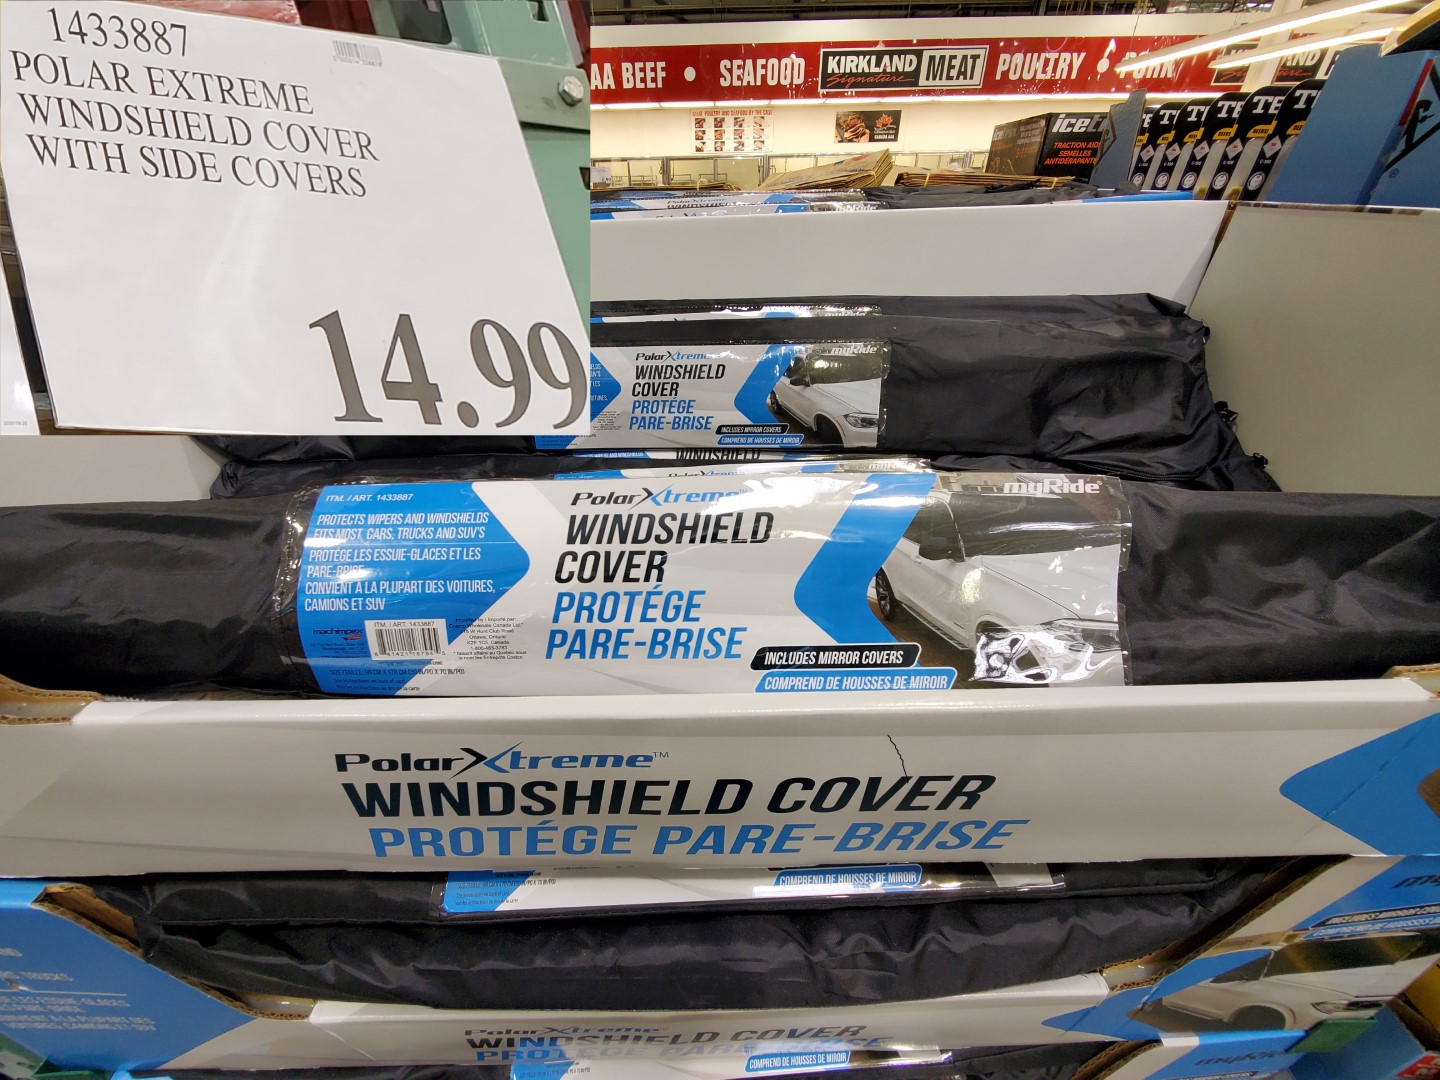 1433887 POLAR EXTREME WINDSHIELD COVER WITH SIDE COVERS 14 99 - Costco East  Fan Blog